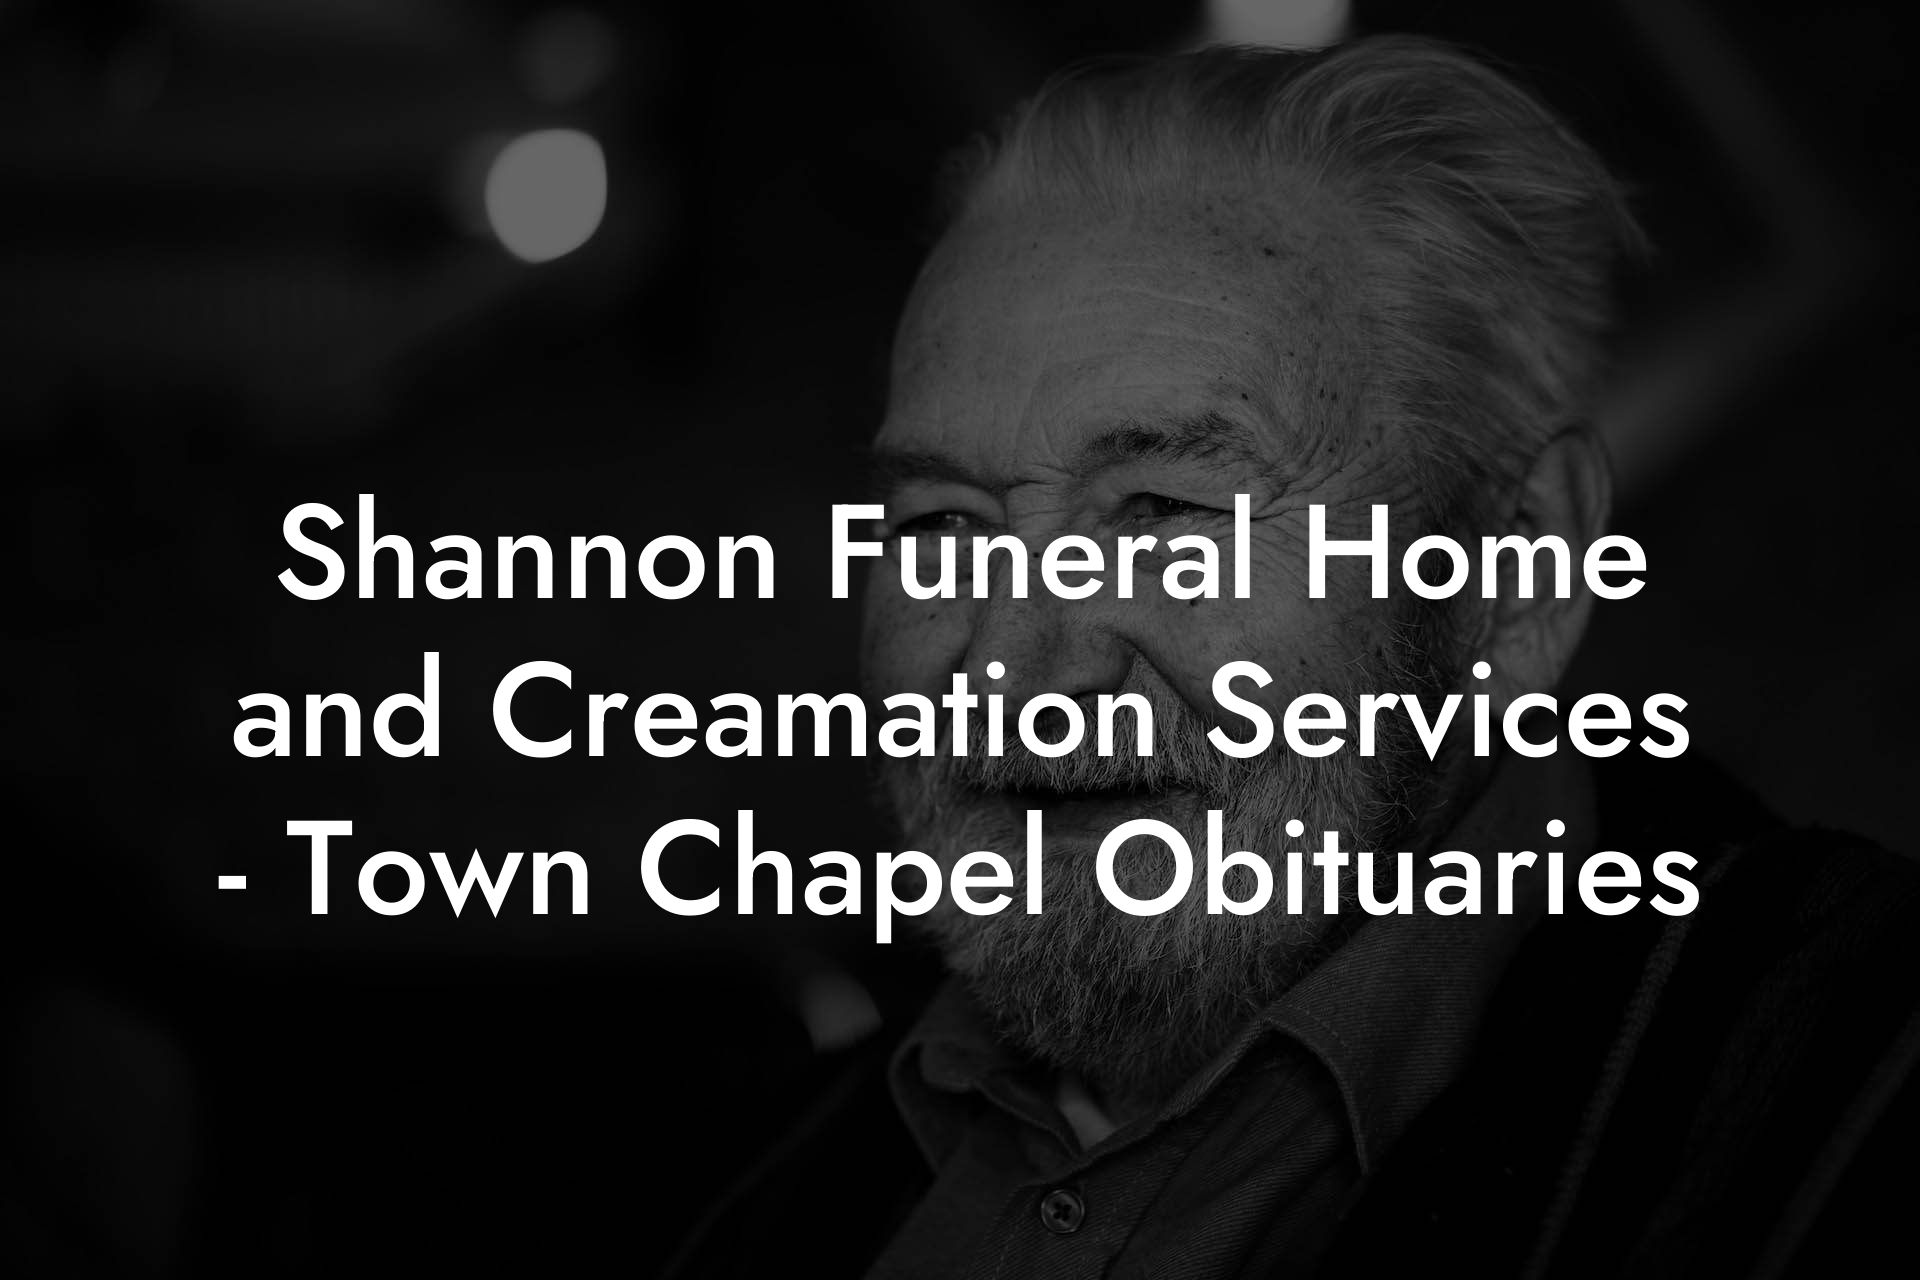 Shannon Funeral Home and Creamation Services - Town Chapel Obituaries